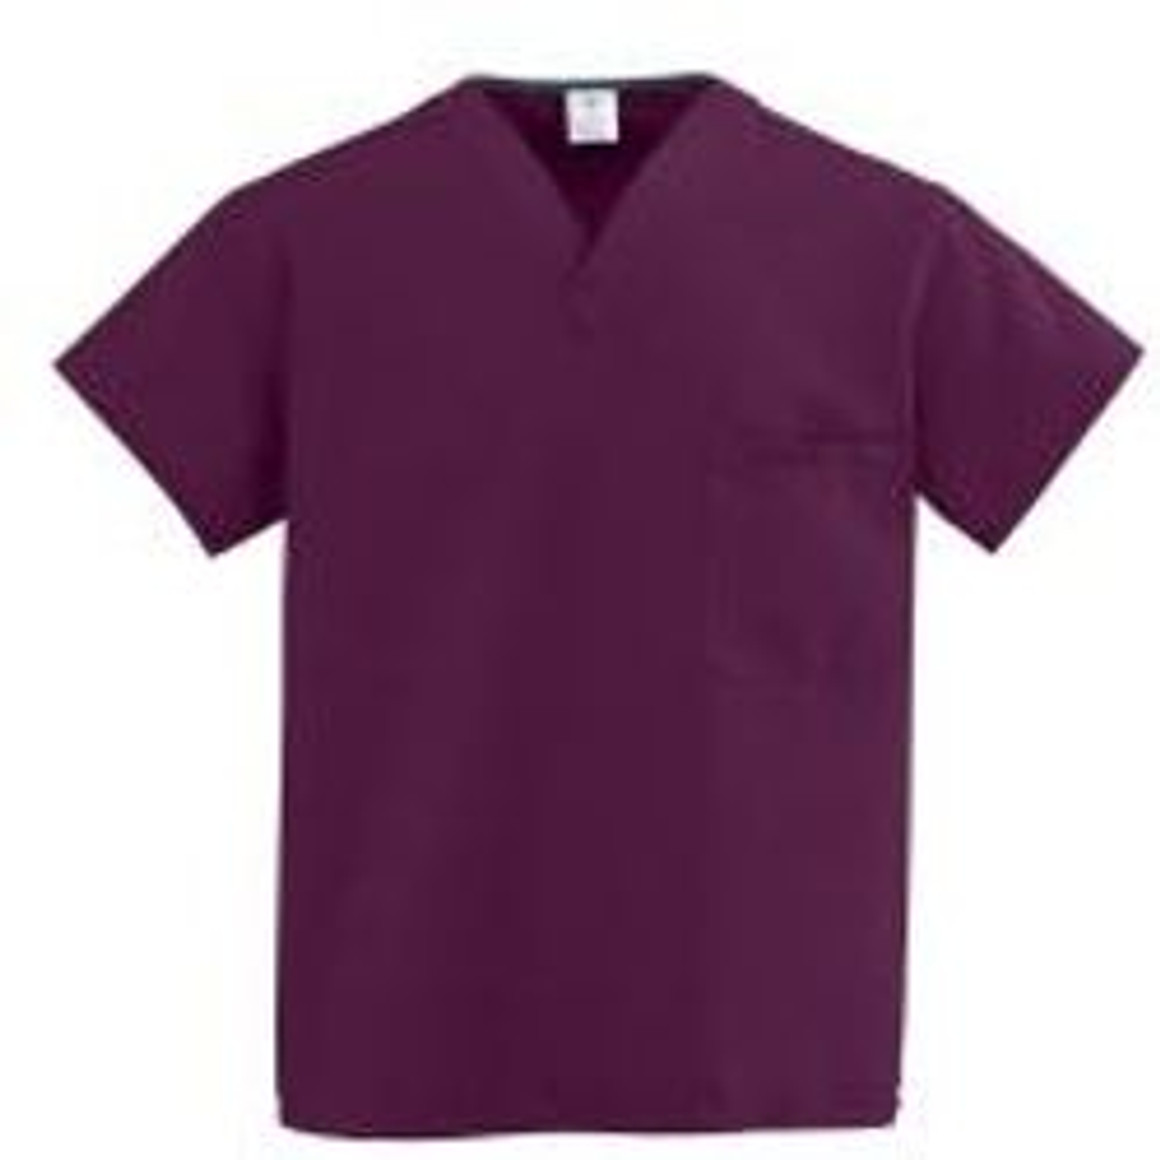 ComfortEase Unisex Reversible V-Neck 3XL Wine Scrub Top with 2 Pockets